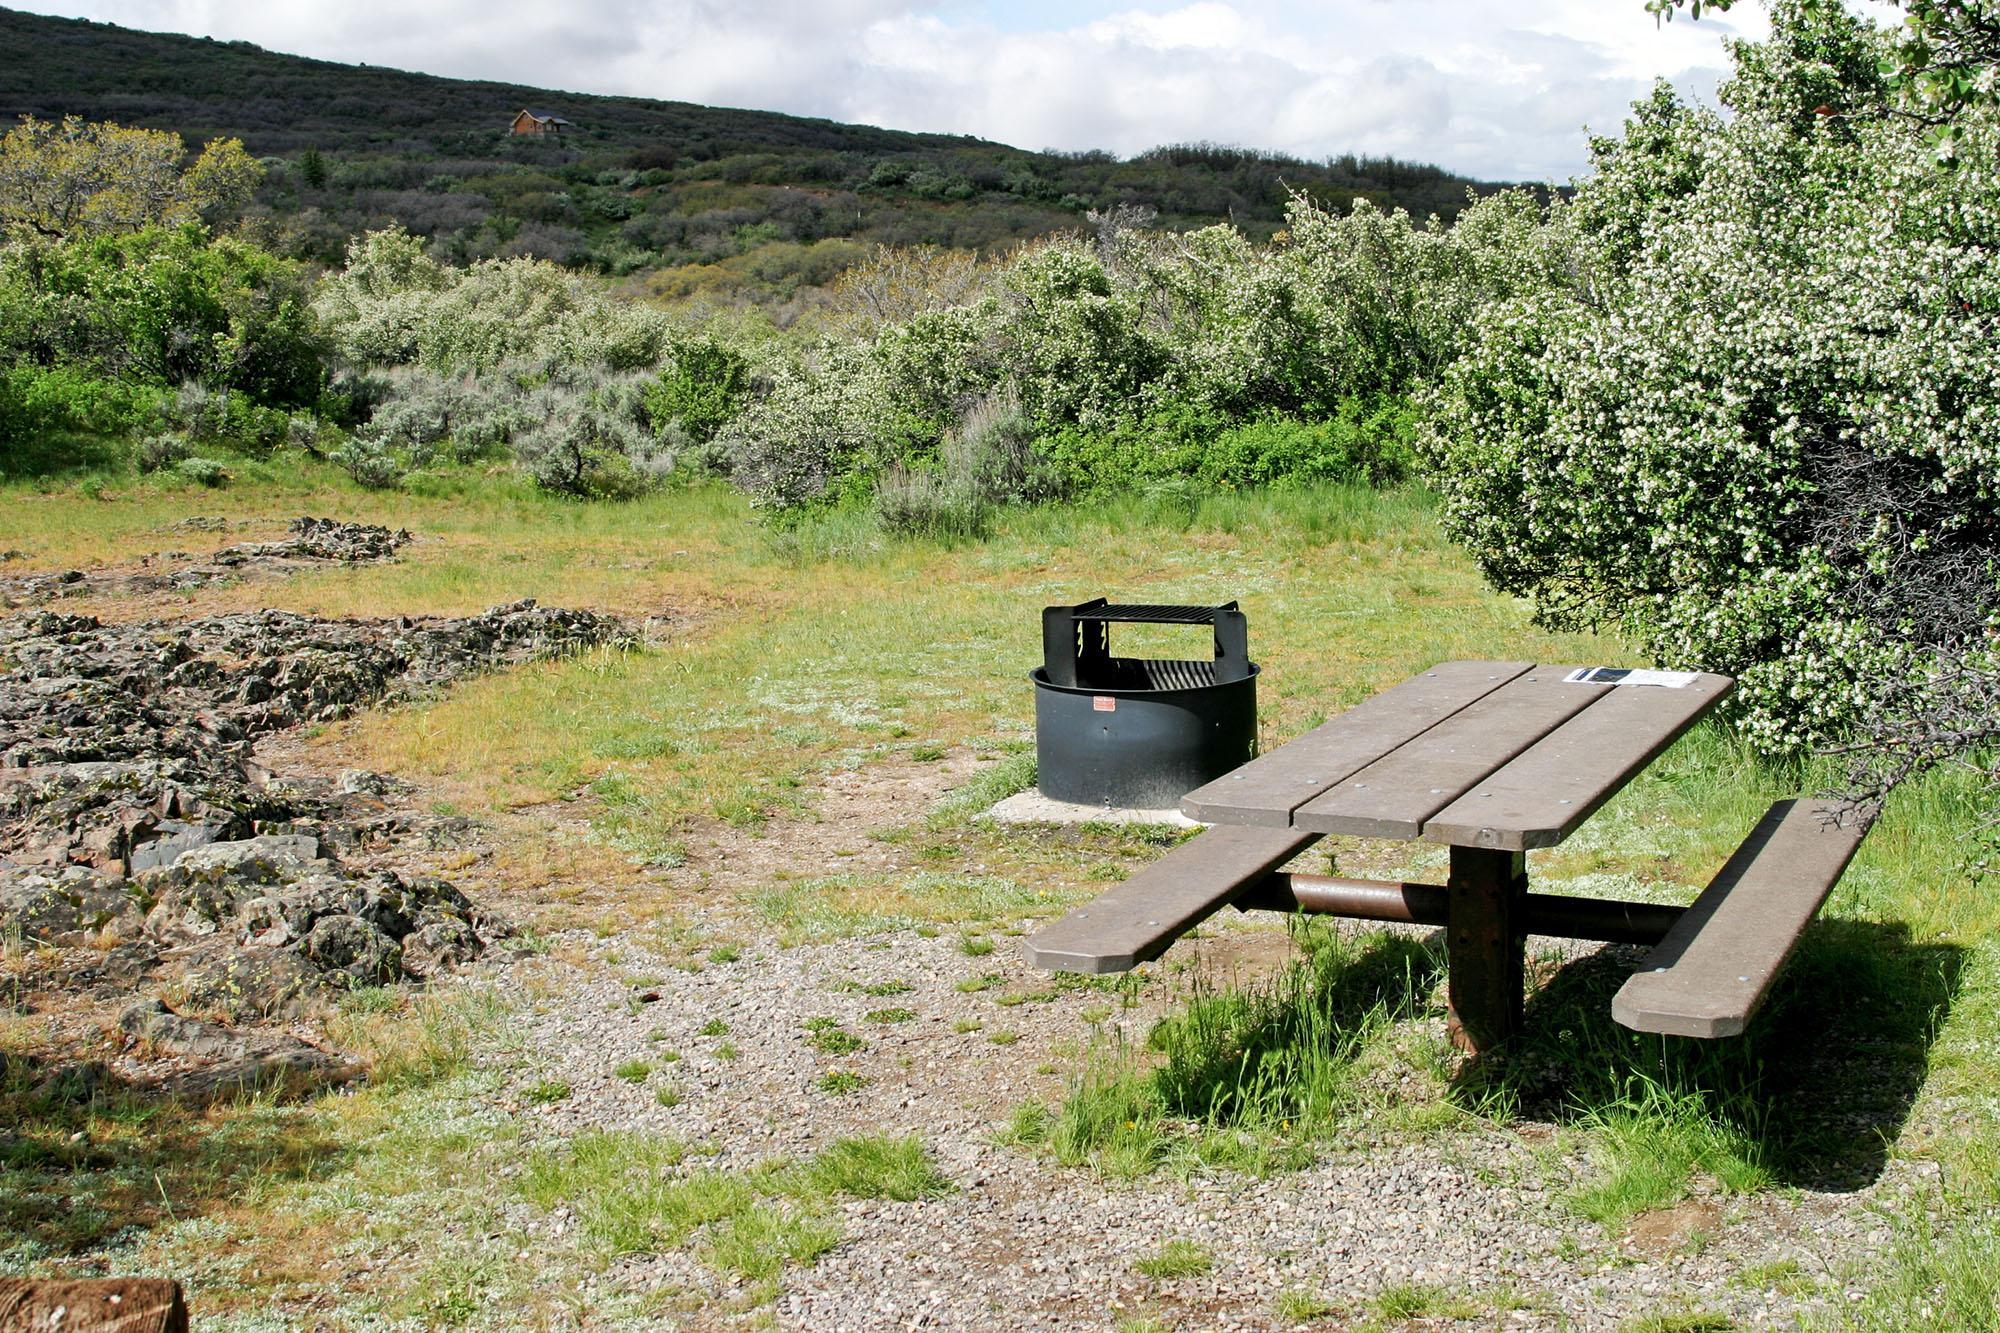 picnic table and fire pit in a grassy clearing among the brush